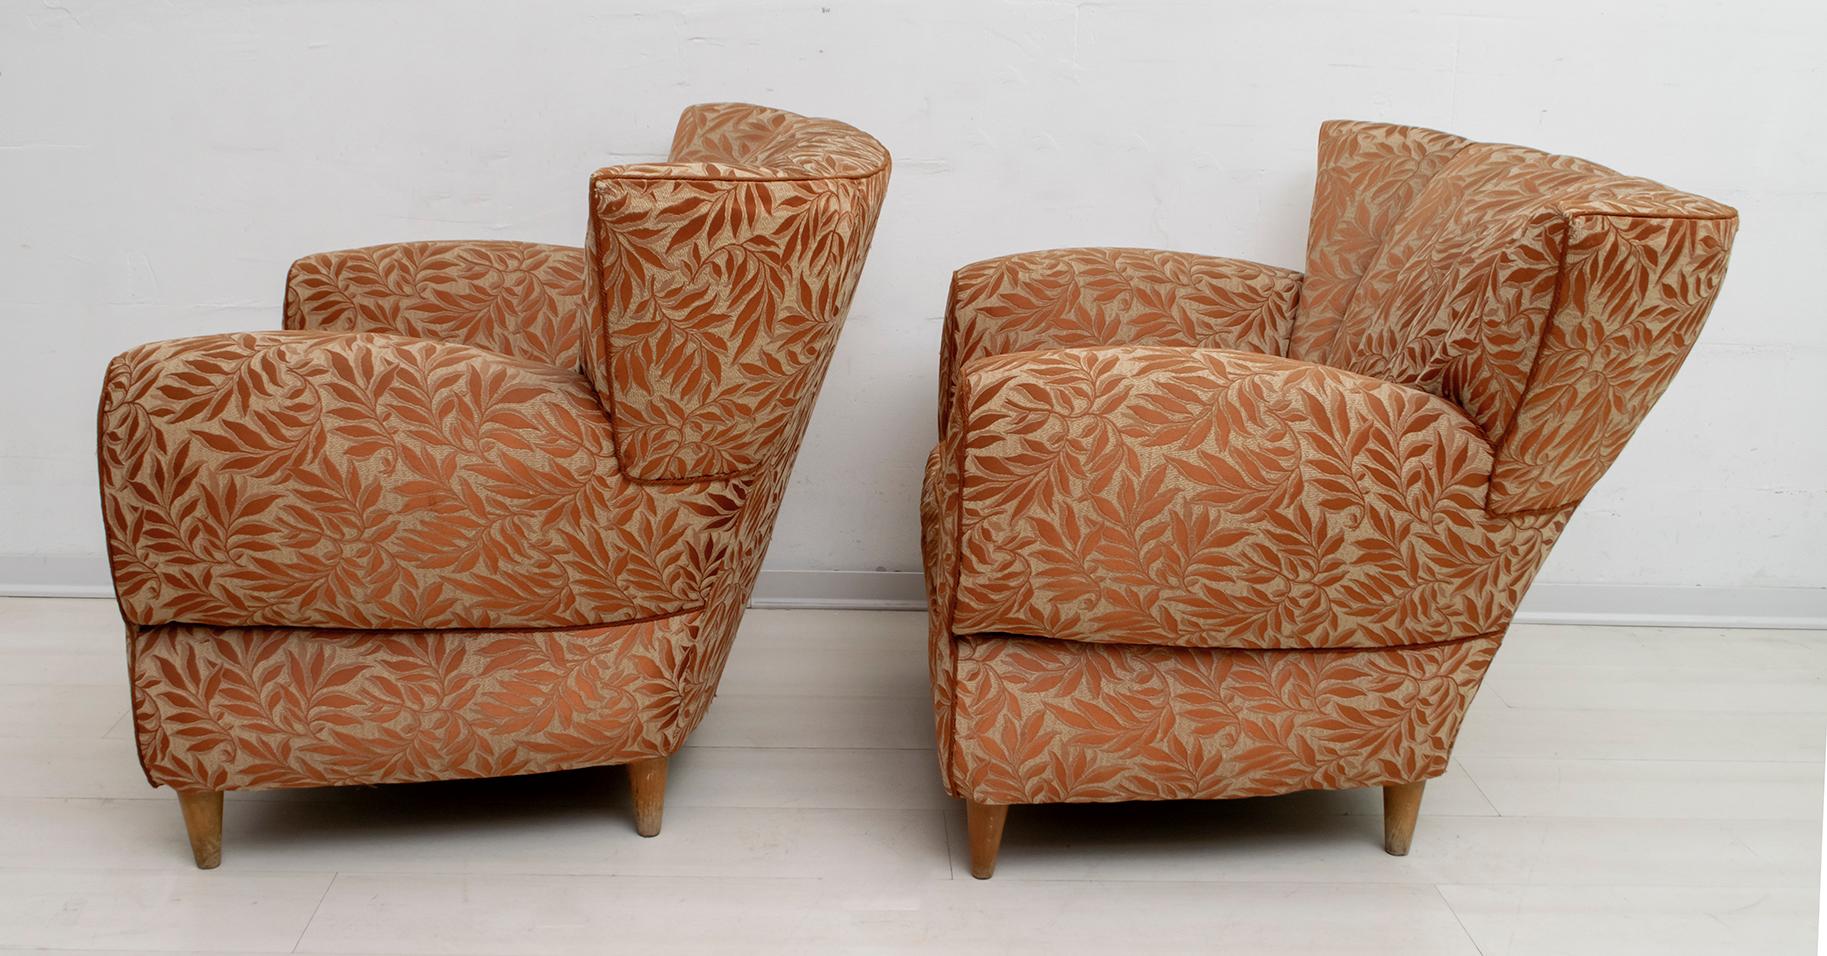 Fabric Pair of Gugliemo Ulrich Art Deco Italian Armchairs, 1940s For Sale